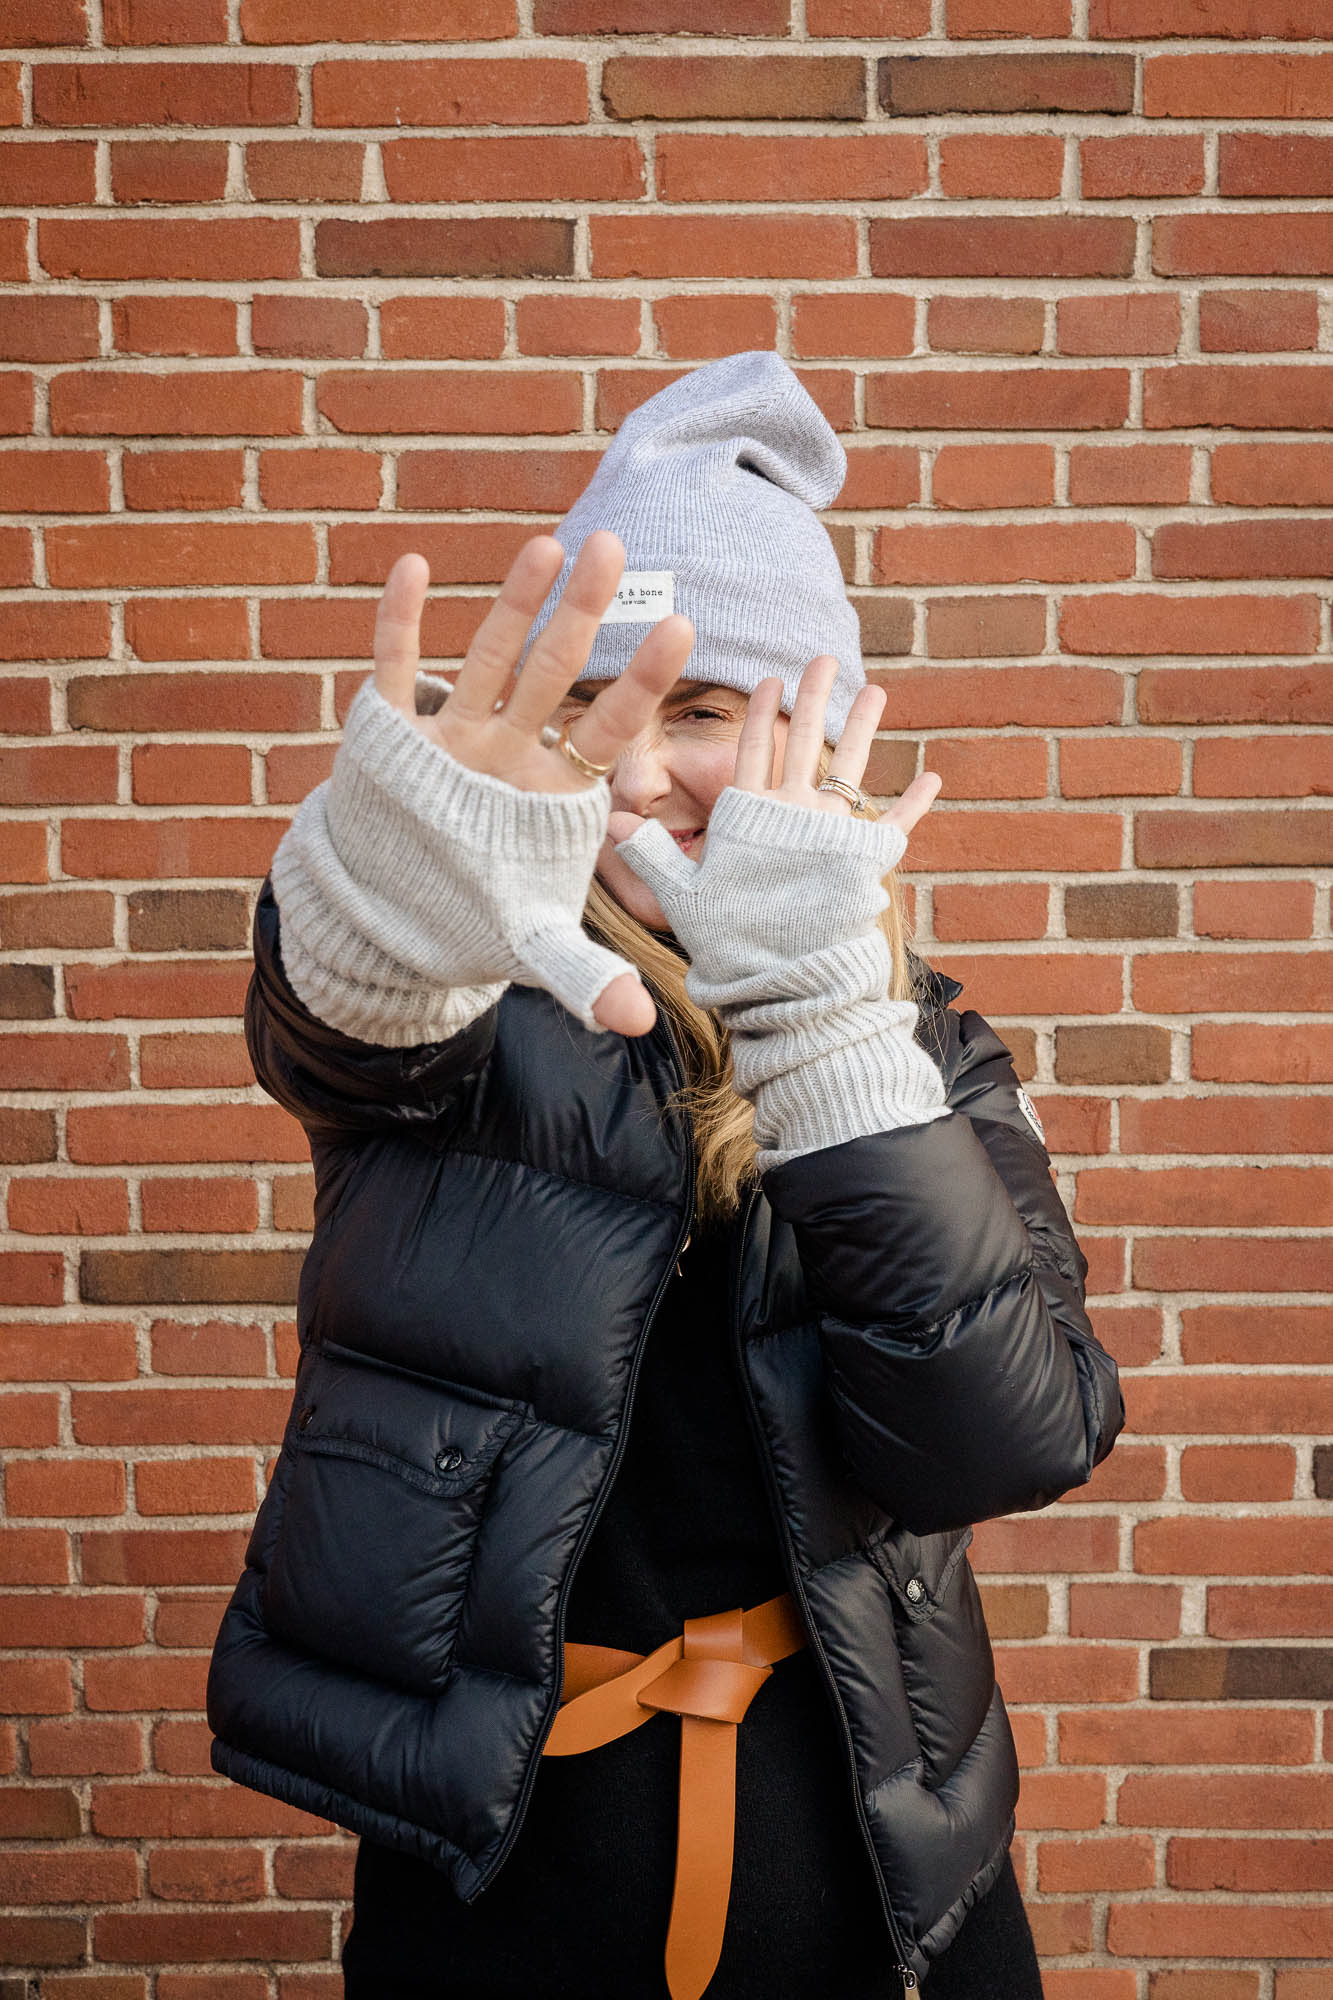 Wearing the Rag and bone Addison beanie in gray with Sweaty Betty gloves.